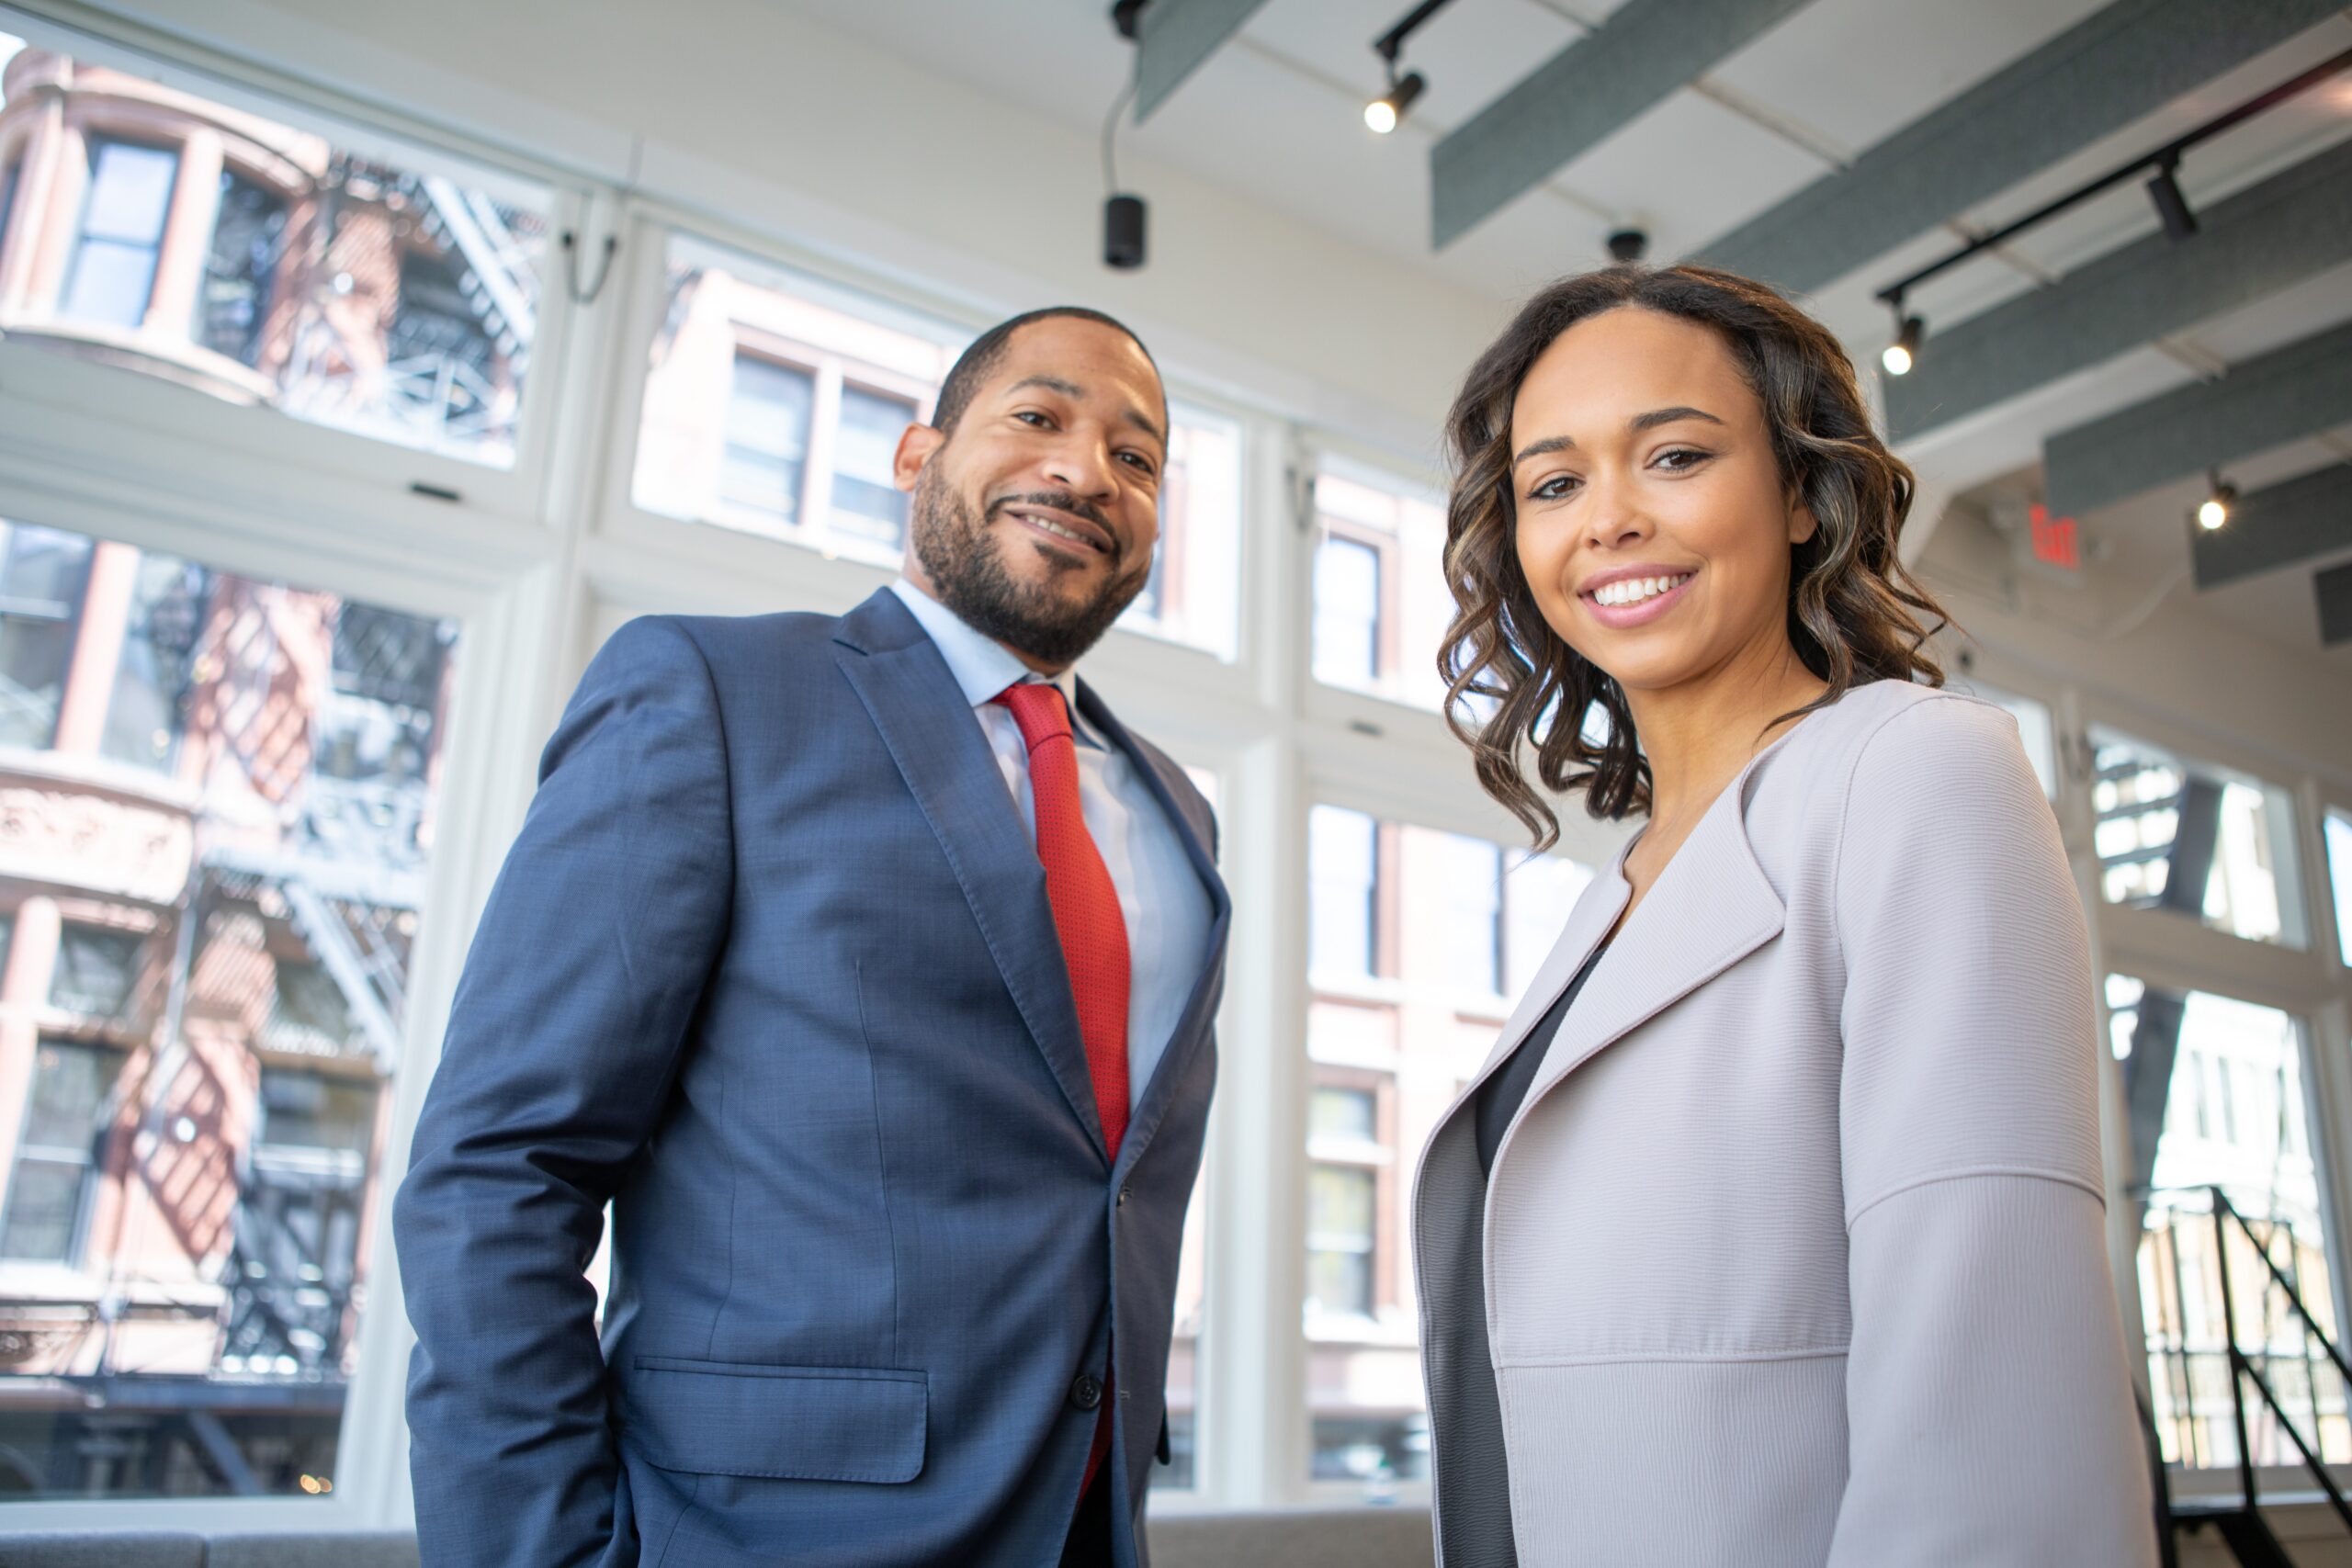 professional photo of two young business people dressed well in a business setting